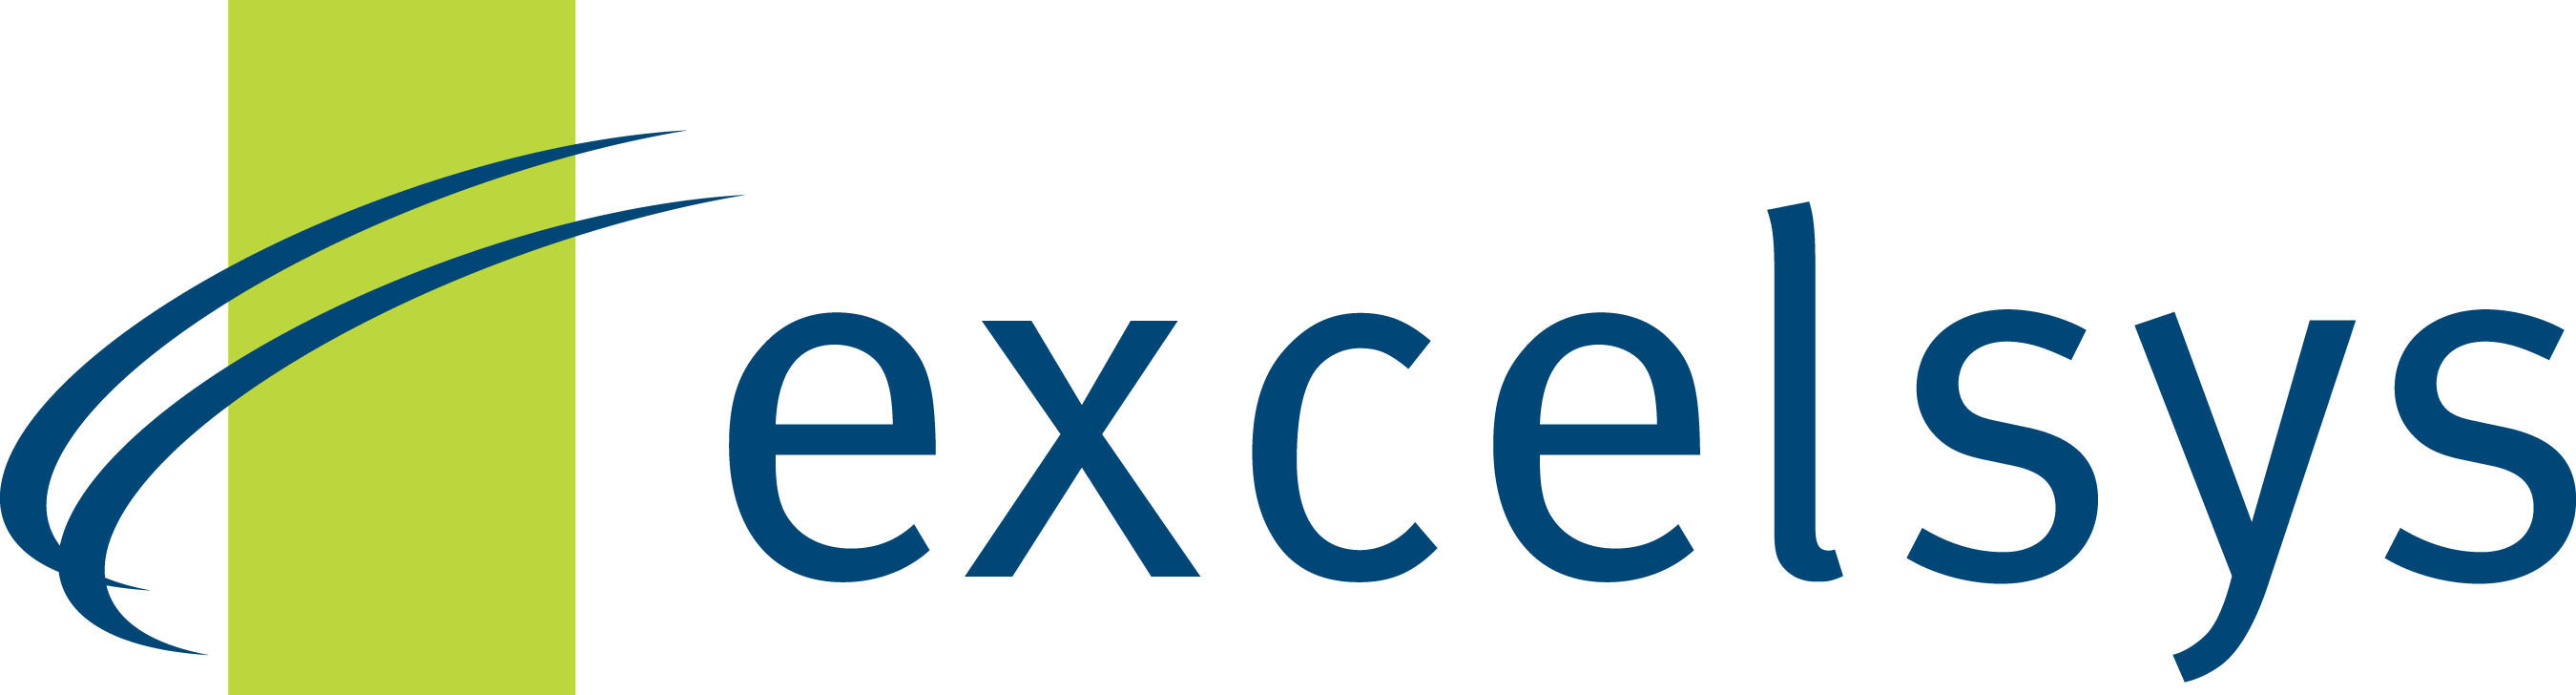 Excelsys Technologies. (PRNewsFoto/Excelsys Technologies, Ltd.) (PRNewsFoto/Excelsys Technologies, Ltd.)